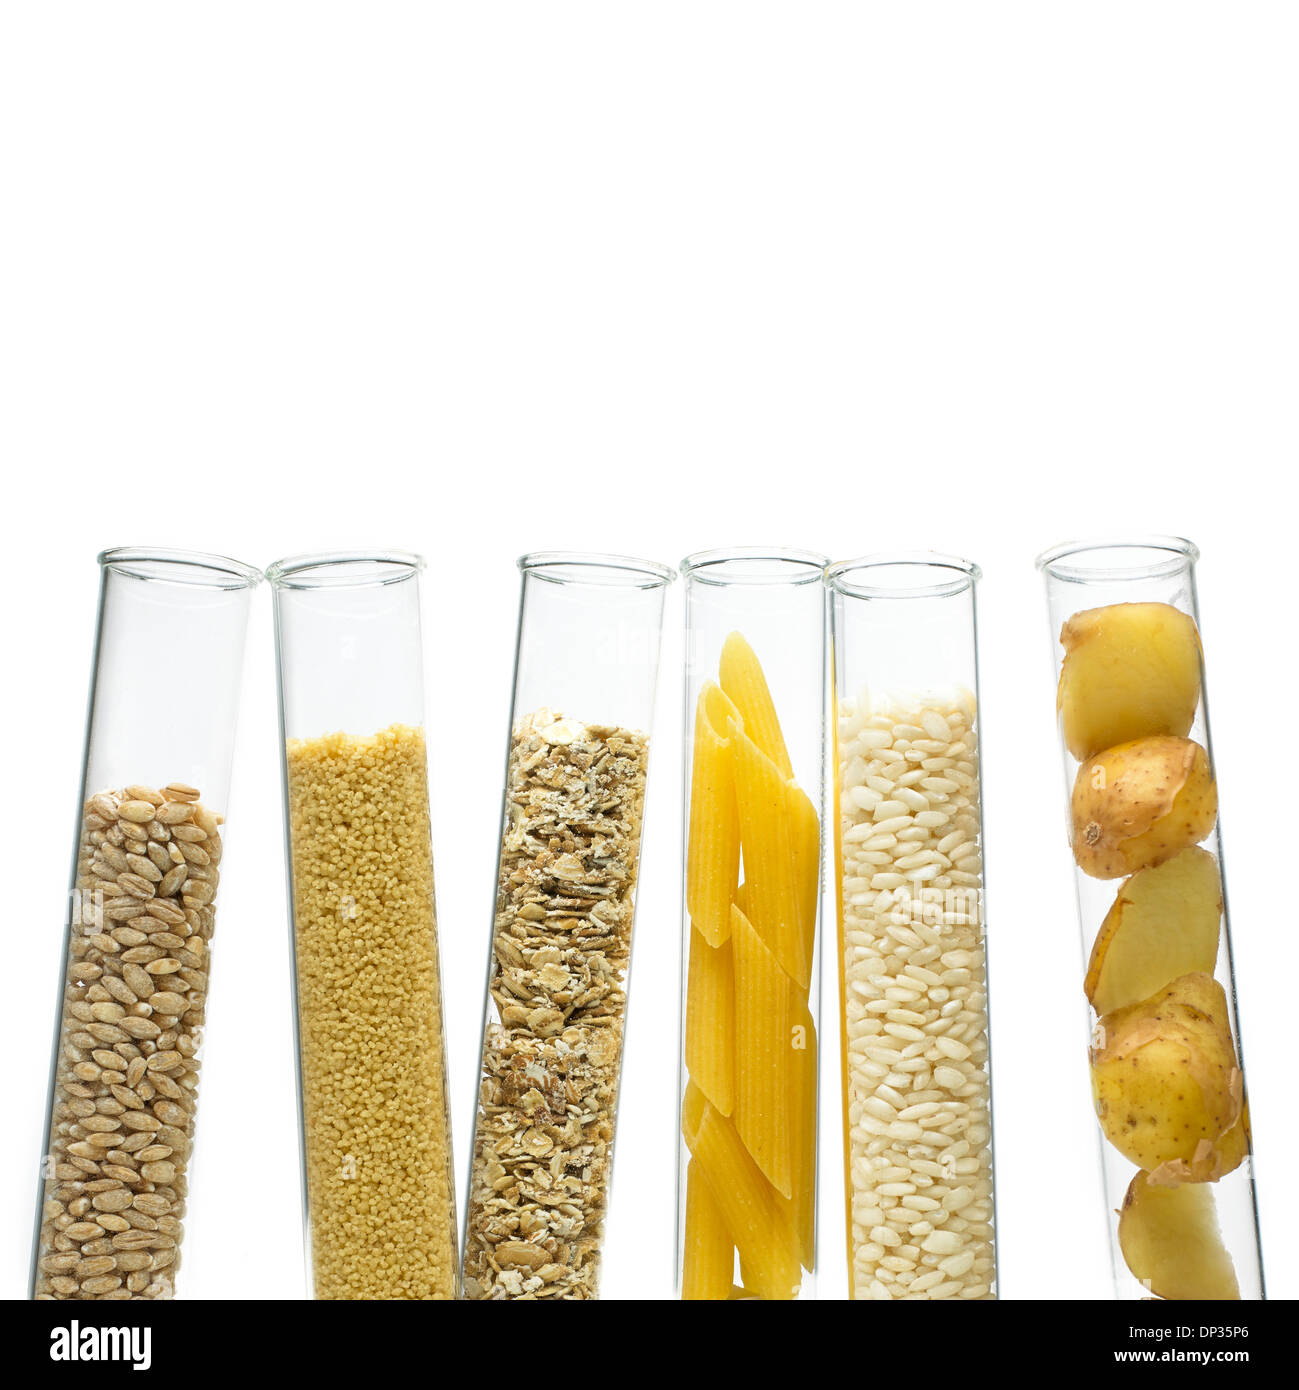 Grains and carbohydrates in test tubes Stock Photo